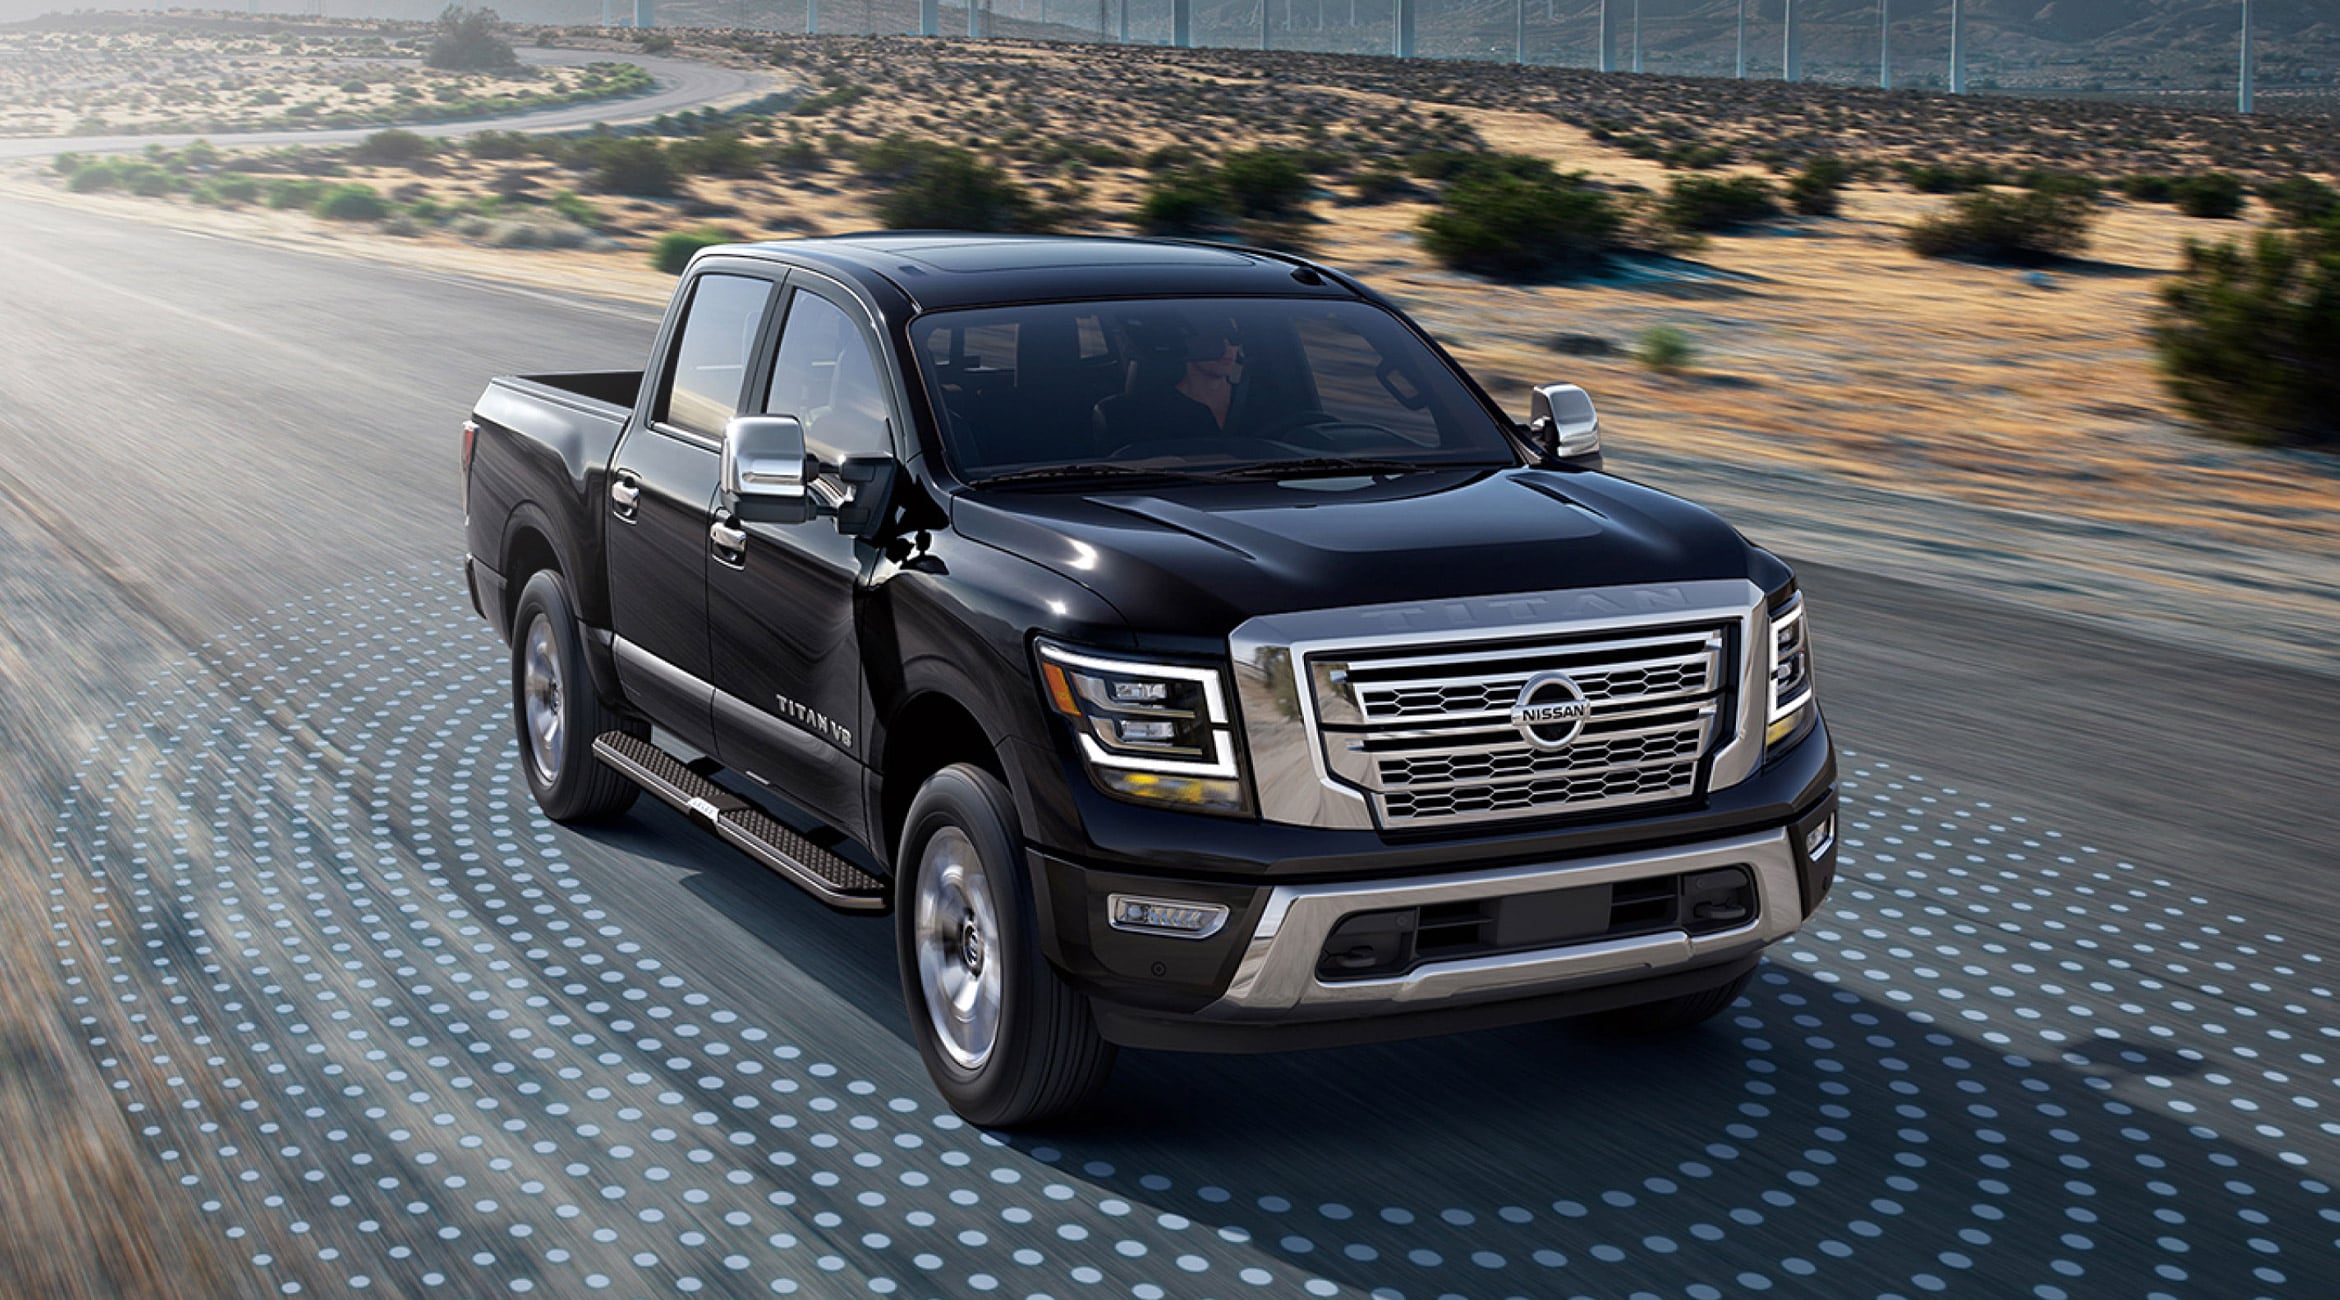 Nissan intelligence Mobility on the Nissan Titan and Titan XD truck